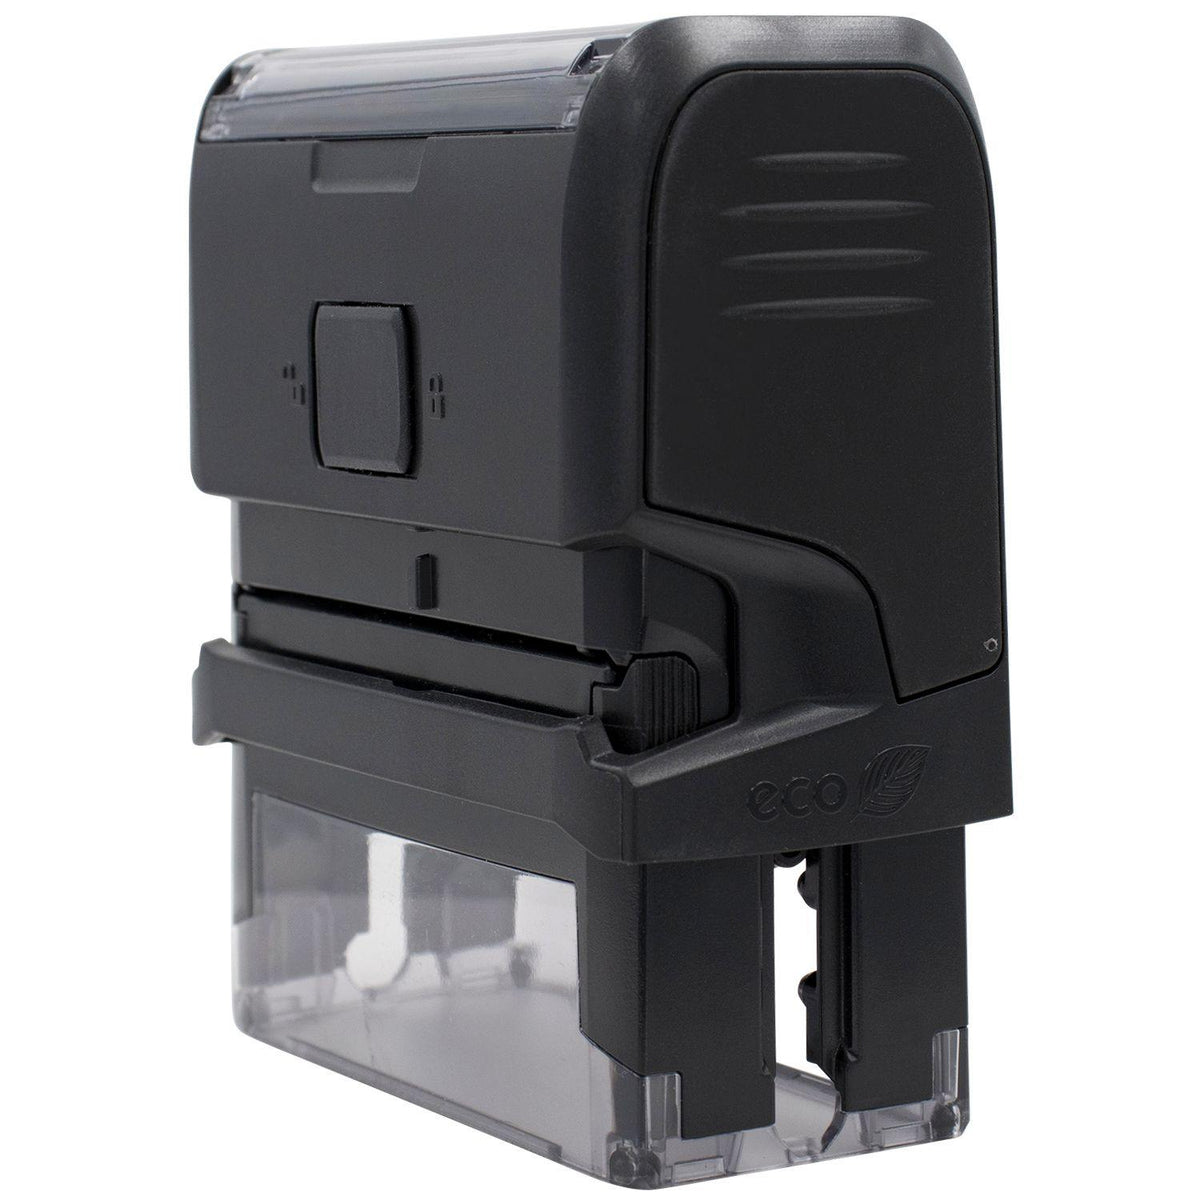 Self Inking Escrow Account Stamp - Engineer Seal Stamps - Brand_Trodat, Impression Size_Small, Stamp Type_Self-Inking Stamp, Type of Use_Finance